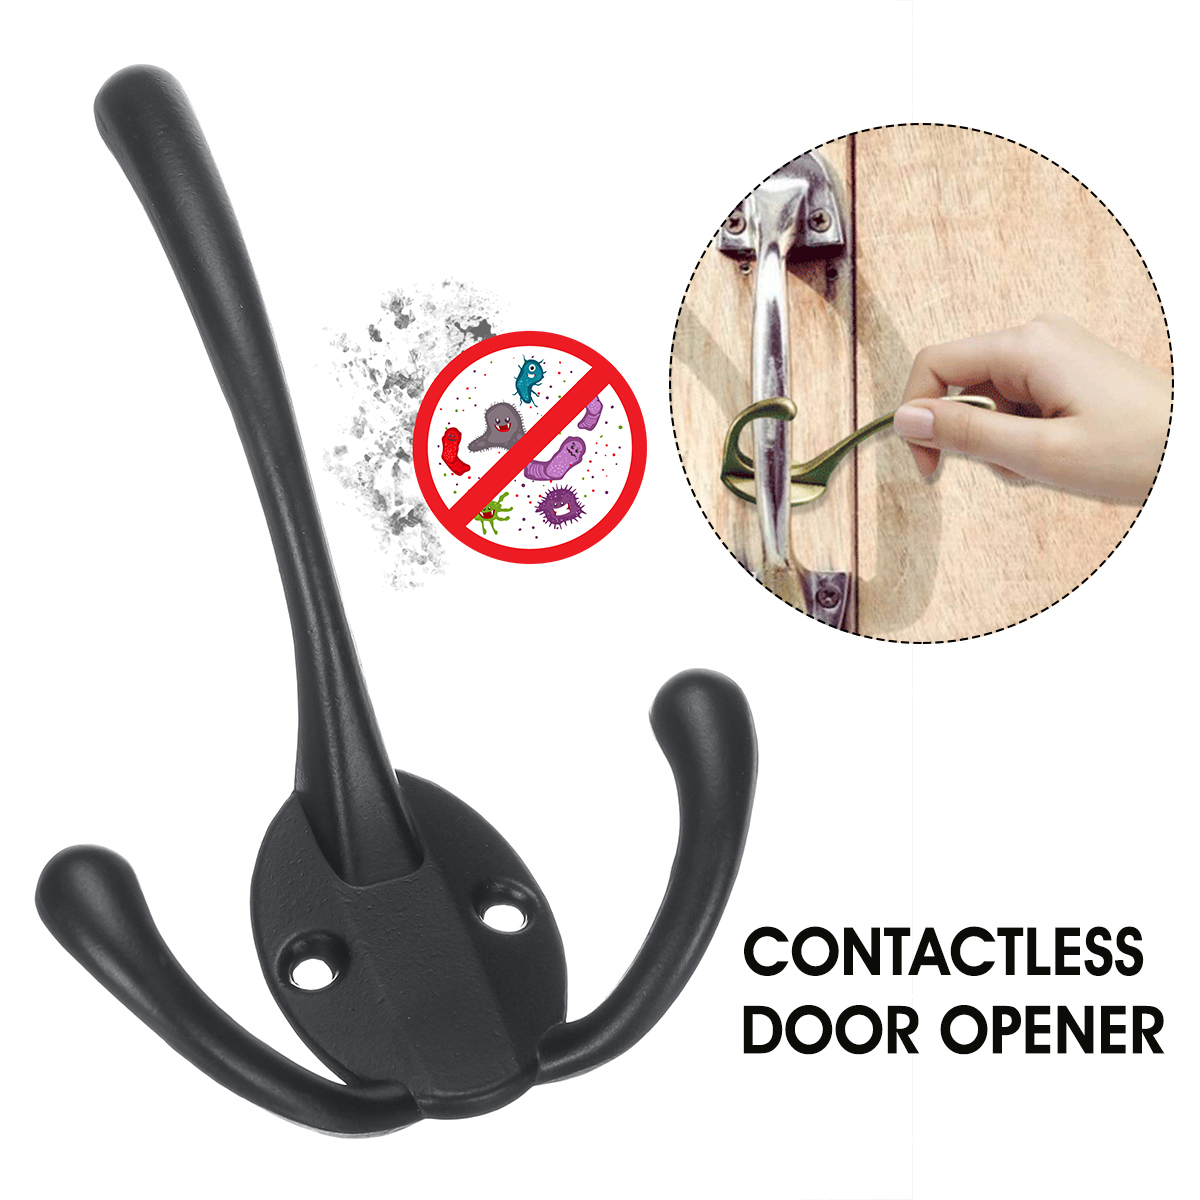 Black-Metal-Contactless-Safety-Hygiene-Door-Opener-NO-Touch-Key-for-Hand-1681855-2